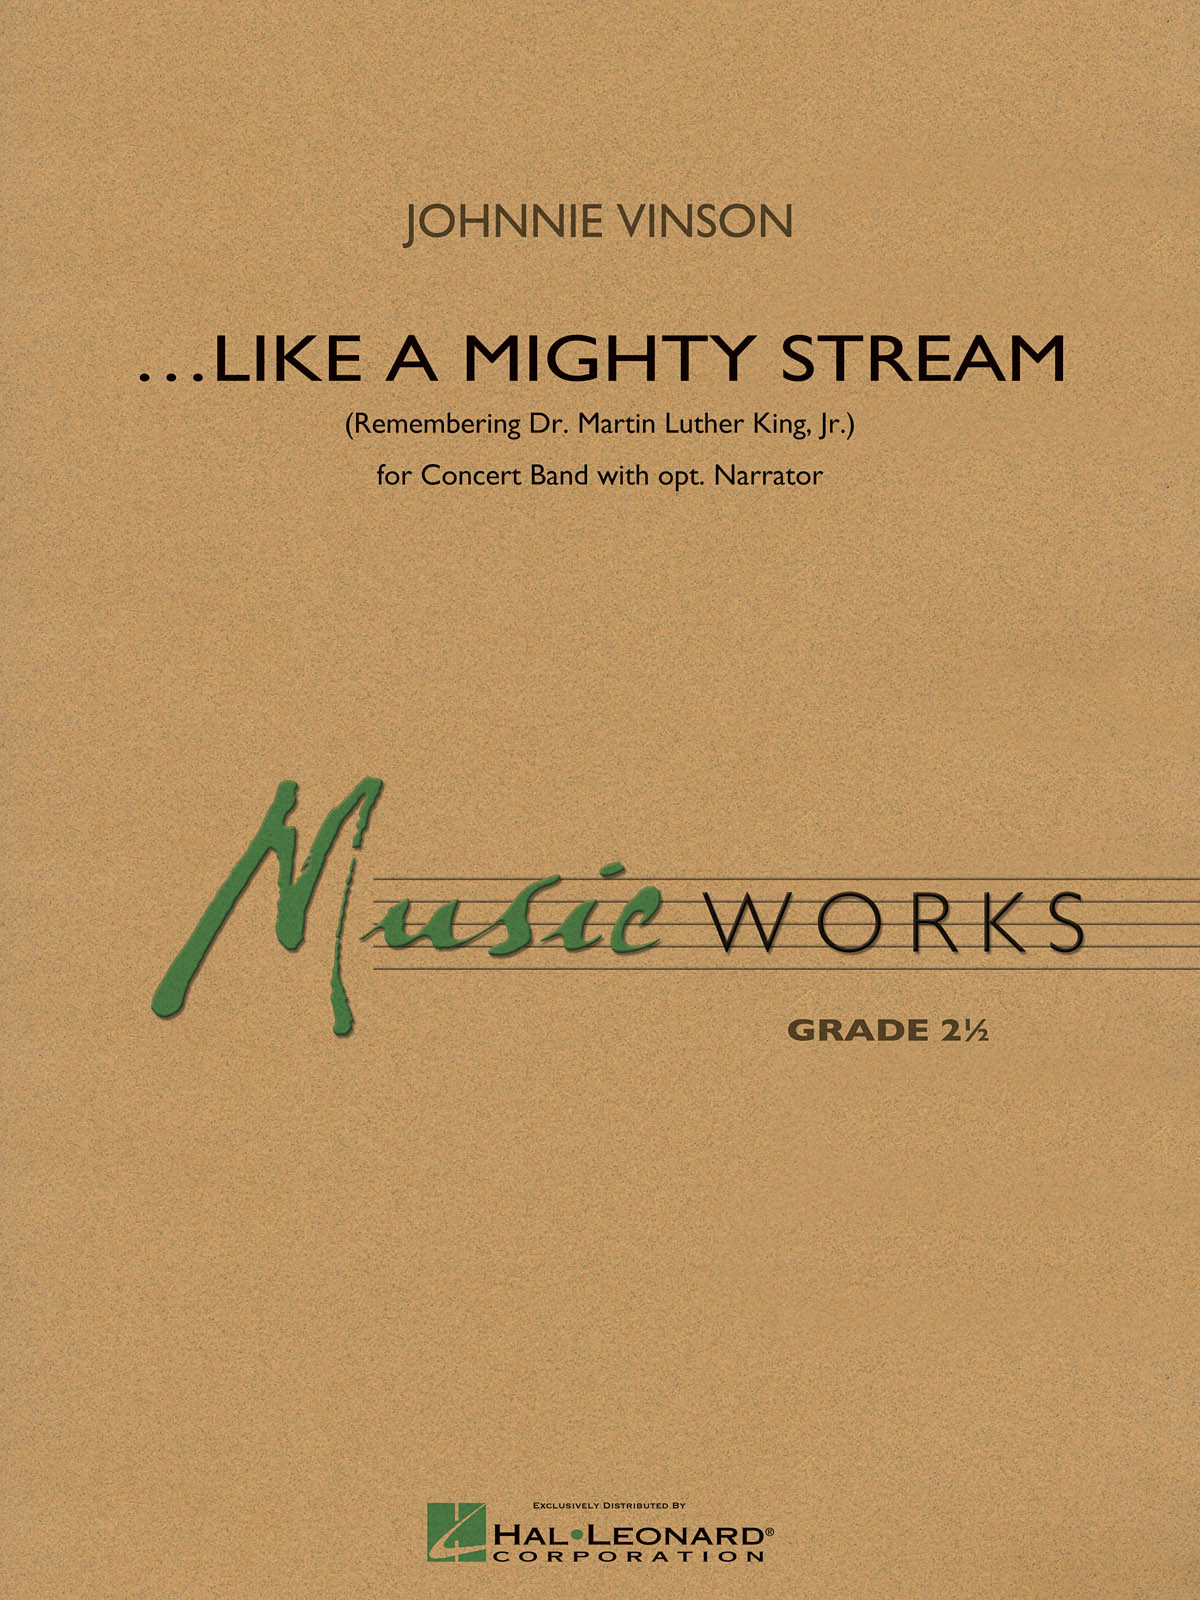 Johnnie Vinson: Like a Mighty Stream: Concert Band: Score & Parts